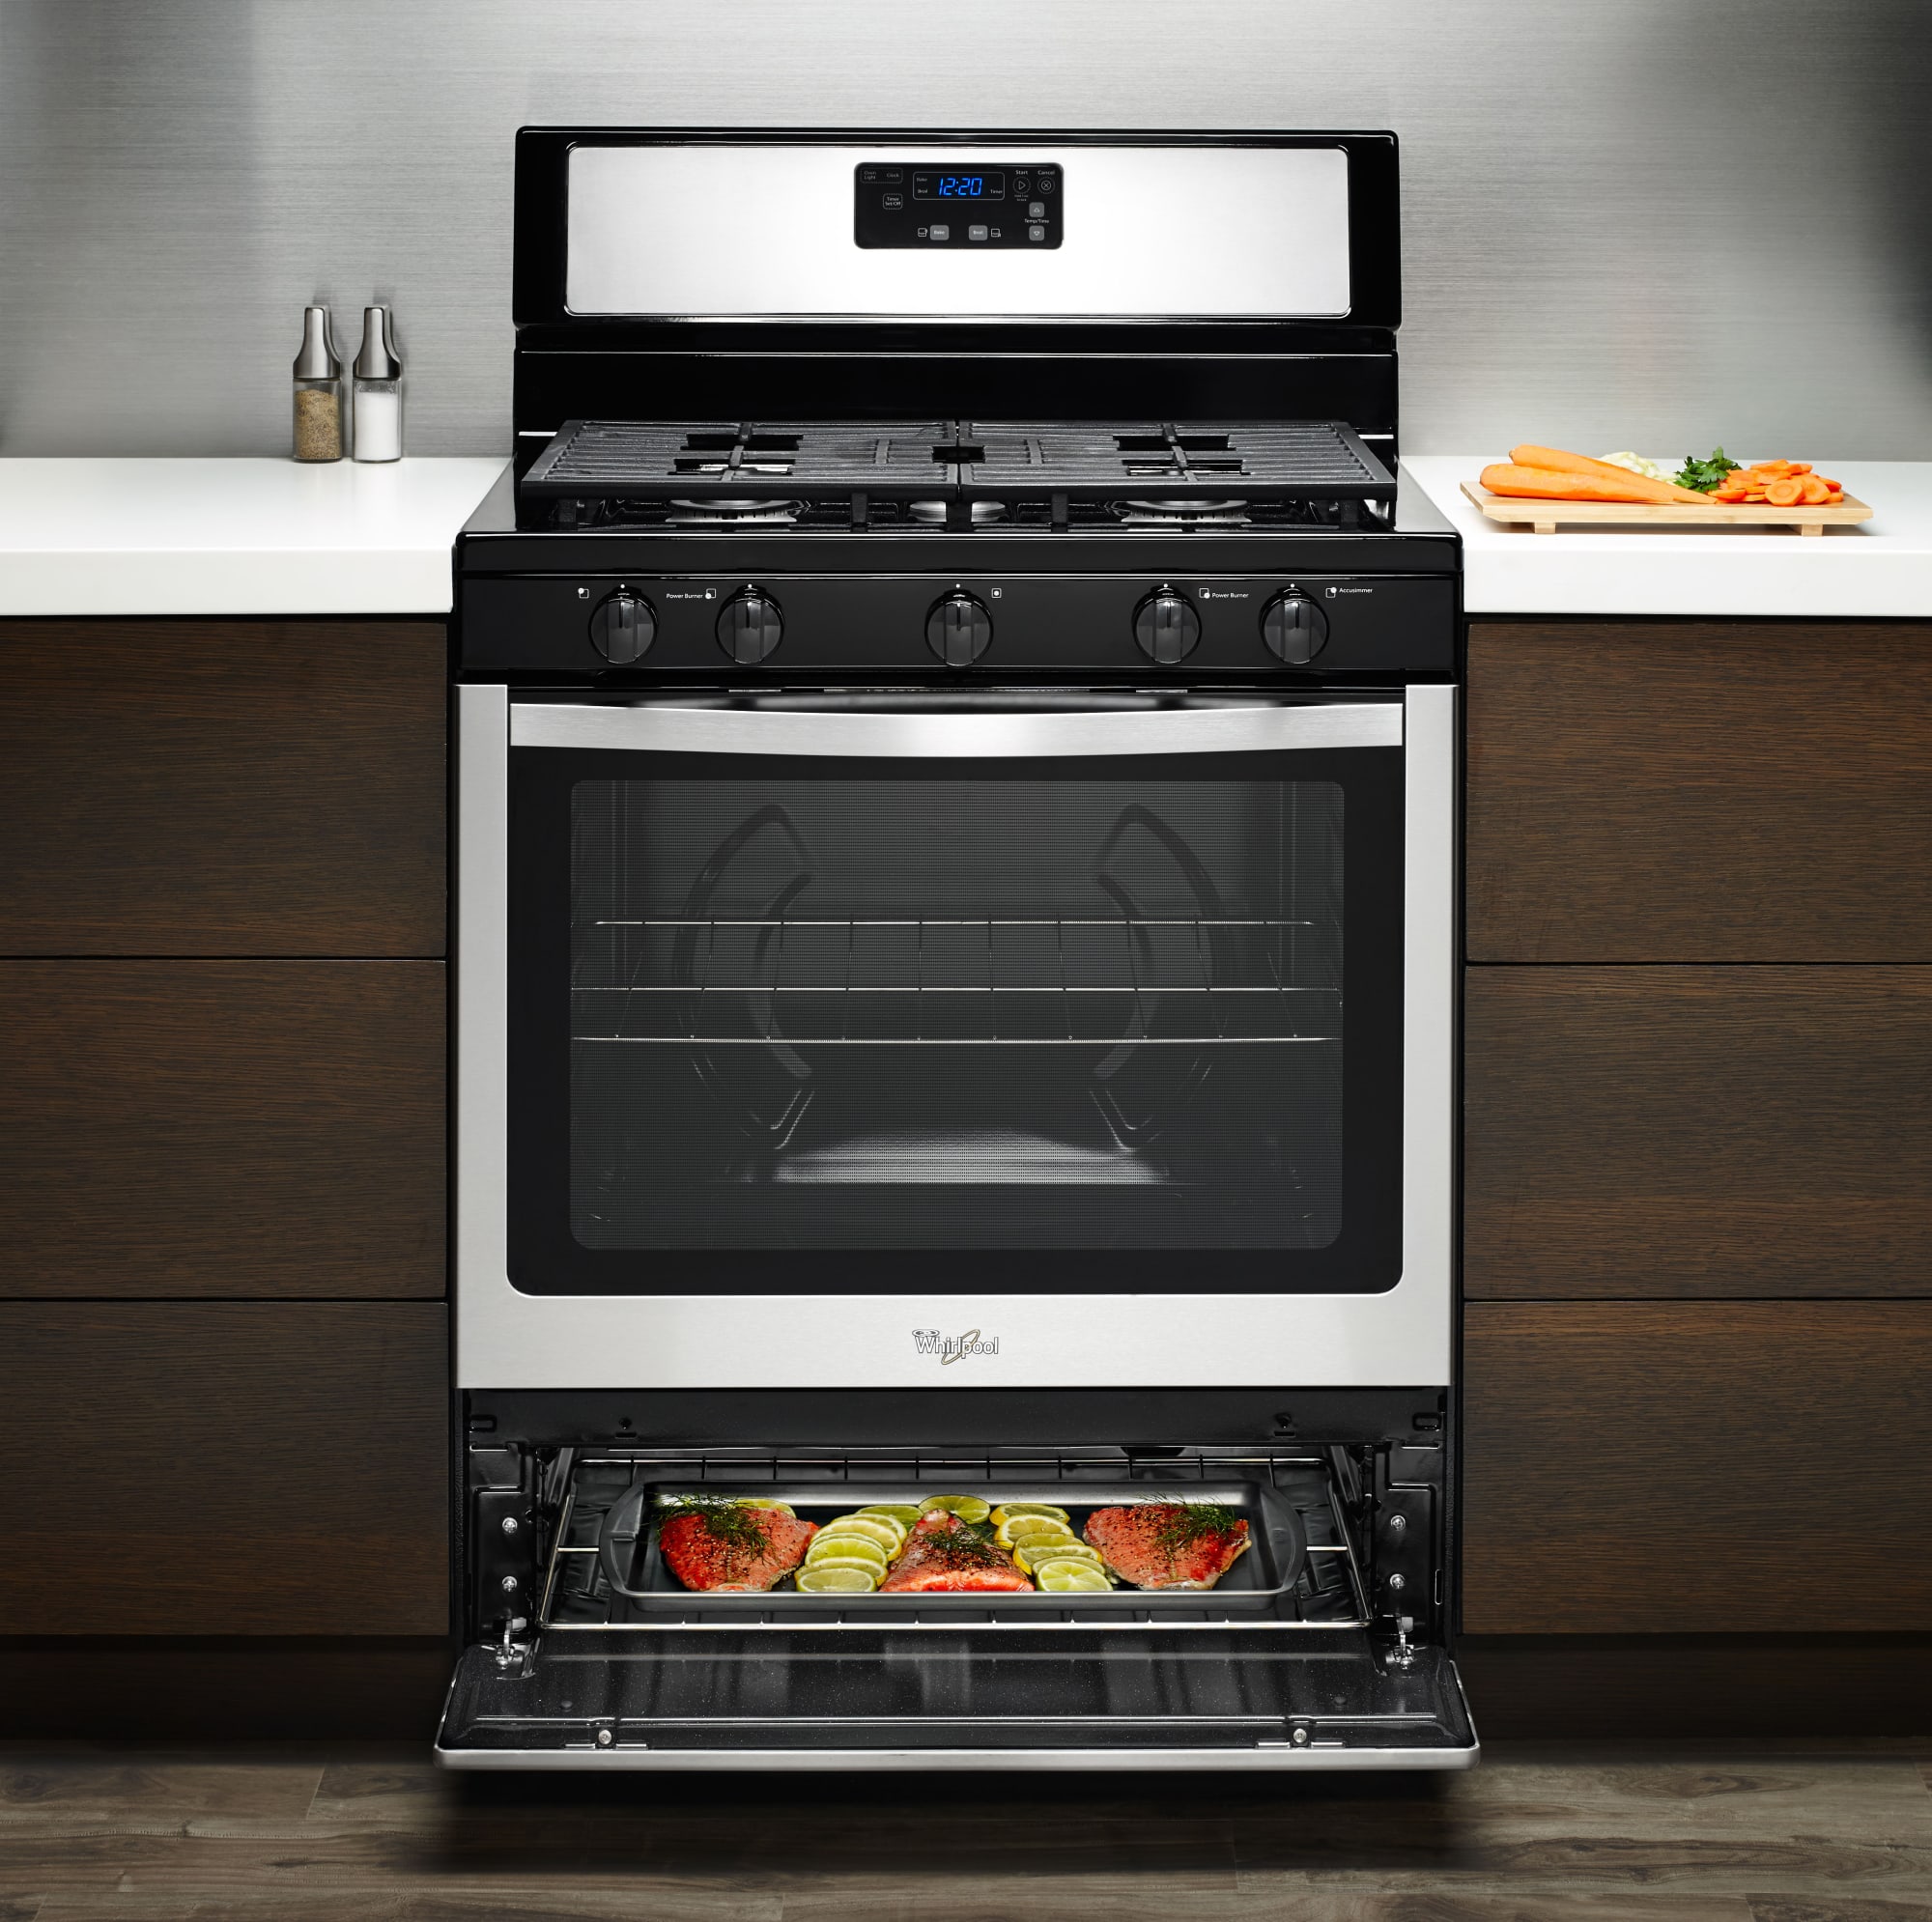 Whirlpool WFG505M0BS 30 Inch Freestanding Gas Range with 5 Sealed